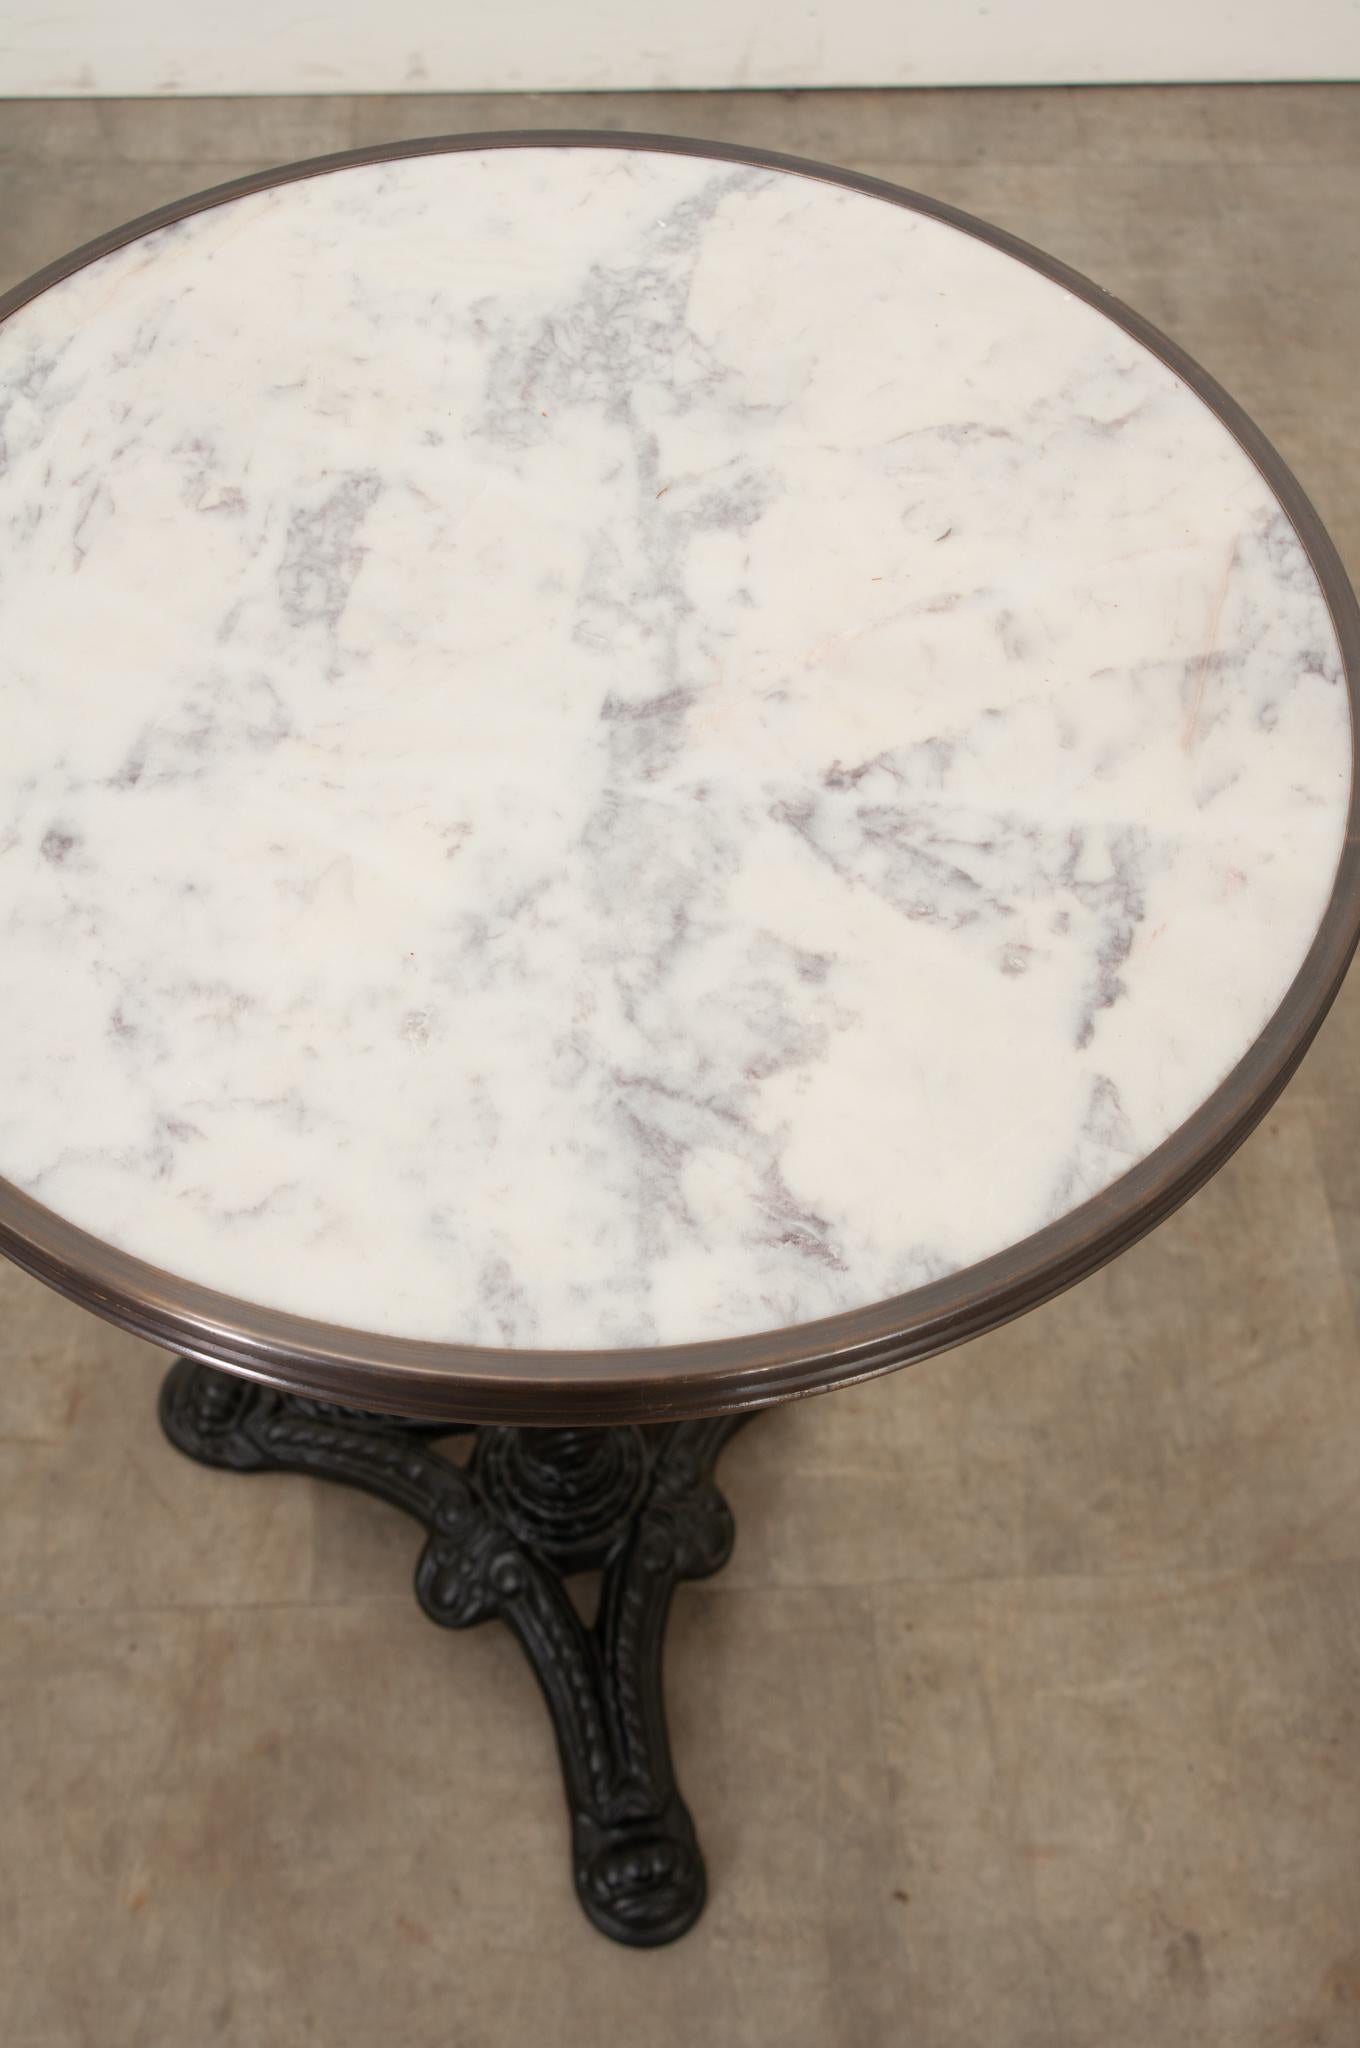 A classic Parisian style marble top & iron bistro table. A unique white marble top is banded by an antiqued brass trim. The base is a classic cast iron pedestal with three feet. This table can be disassembled for shipping or storage. If using this